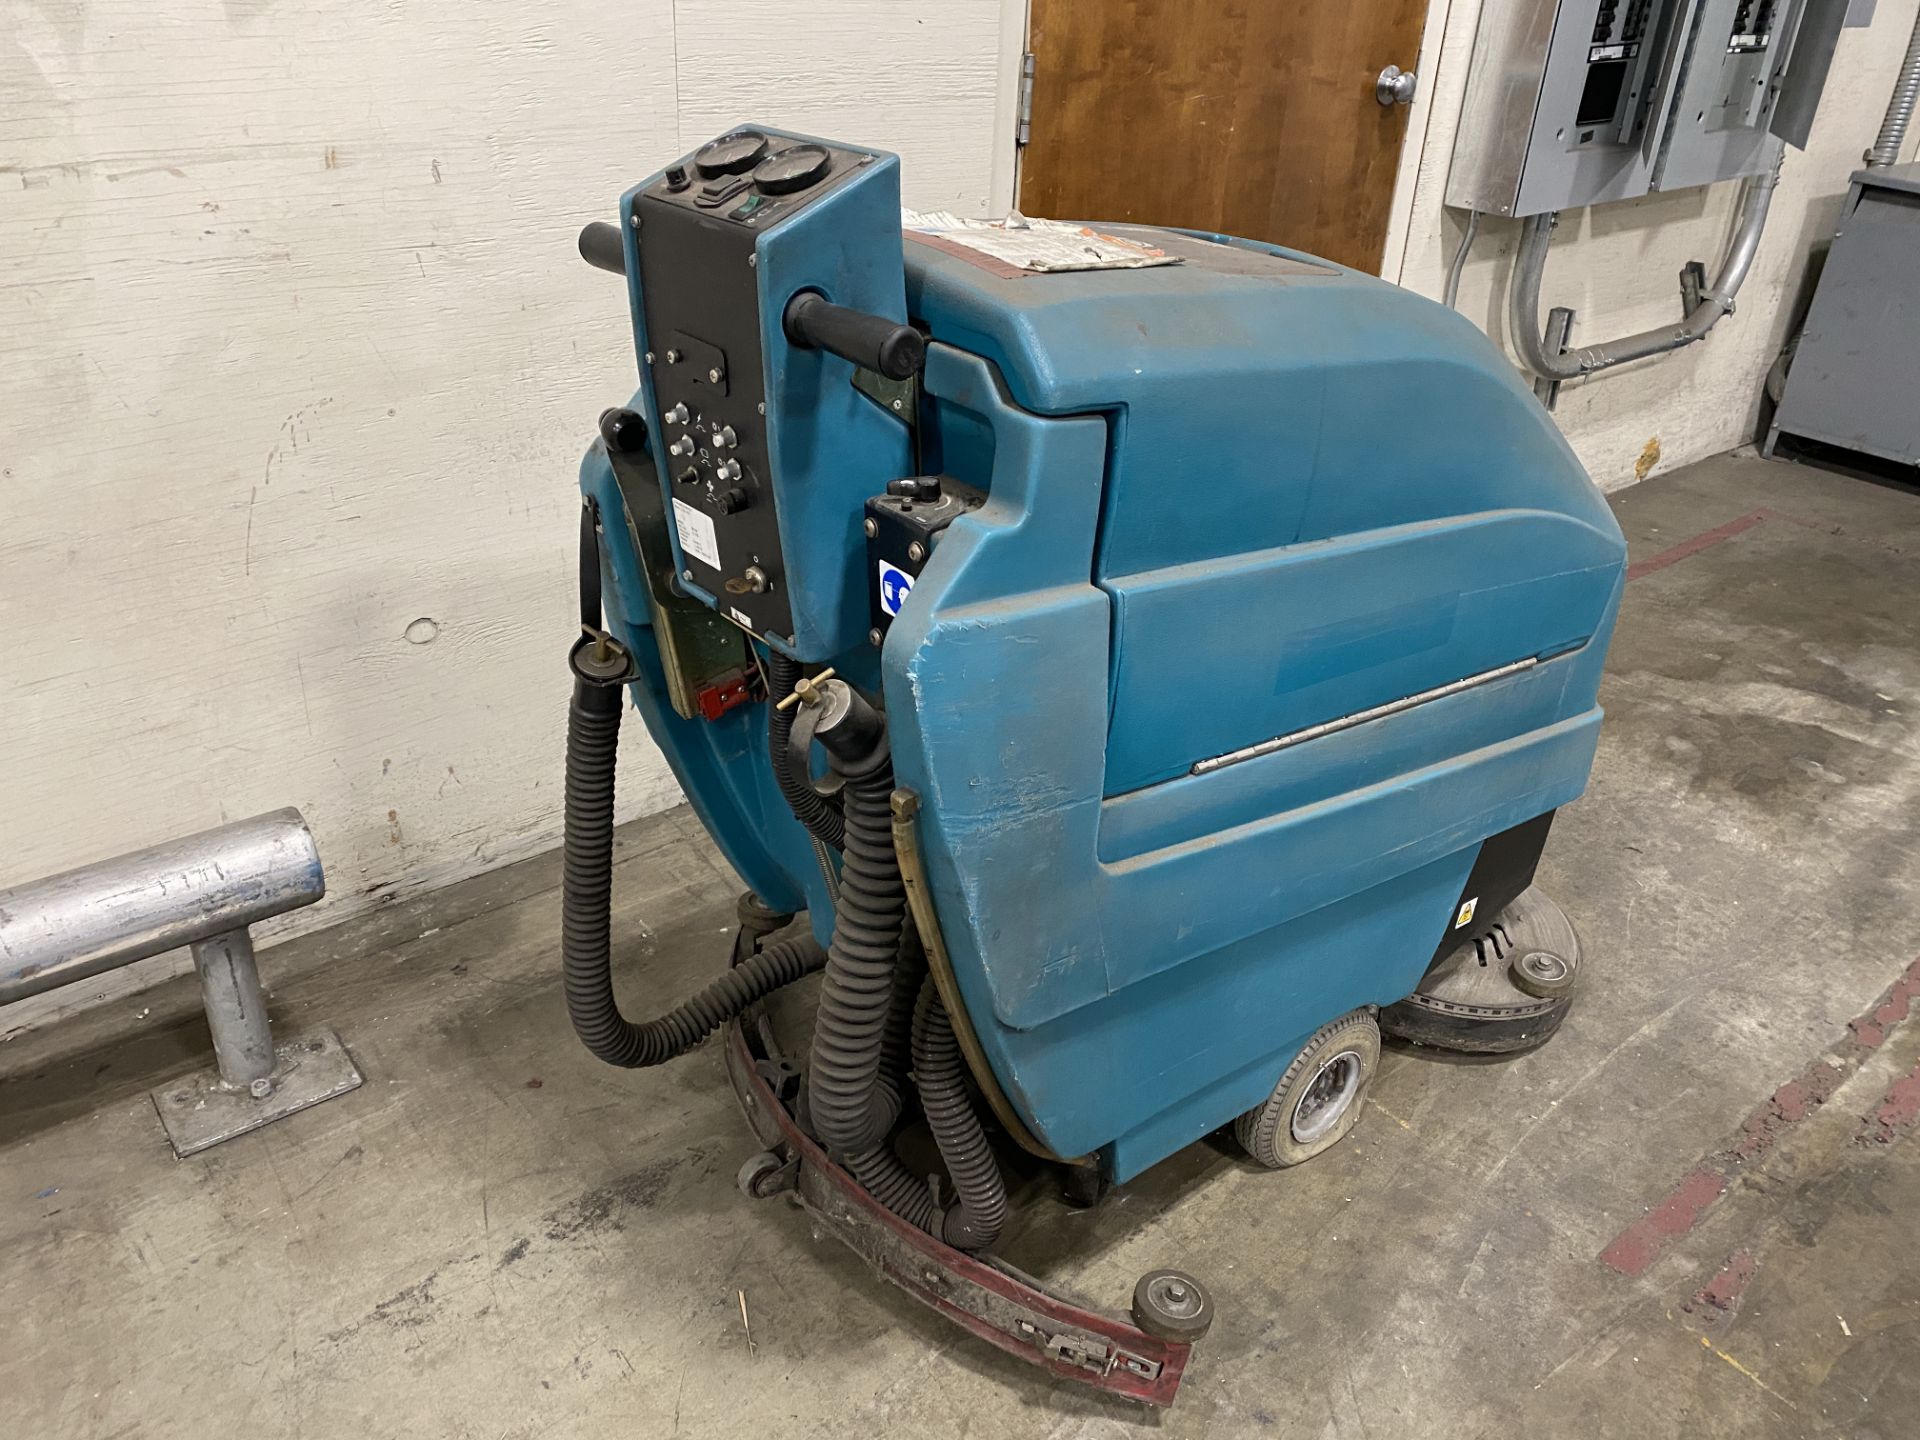 Tennant Mn. 5400 electric walk behind floor scrubber, 24 V with charger (charger as is) - Image 2 of 3